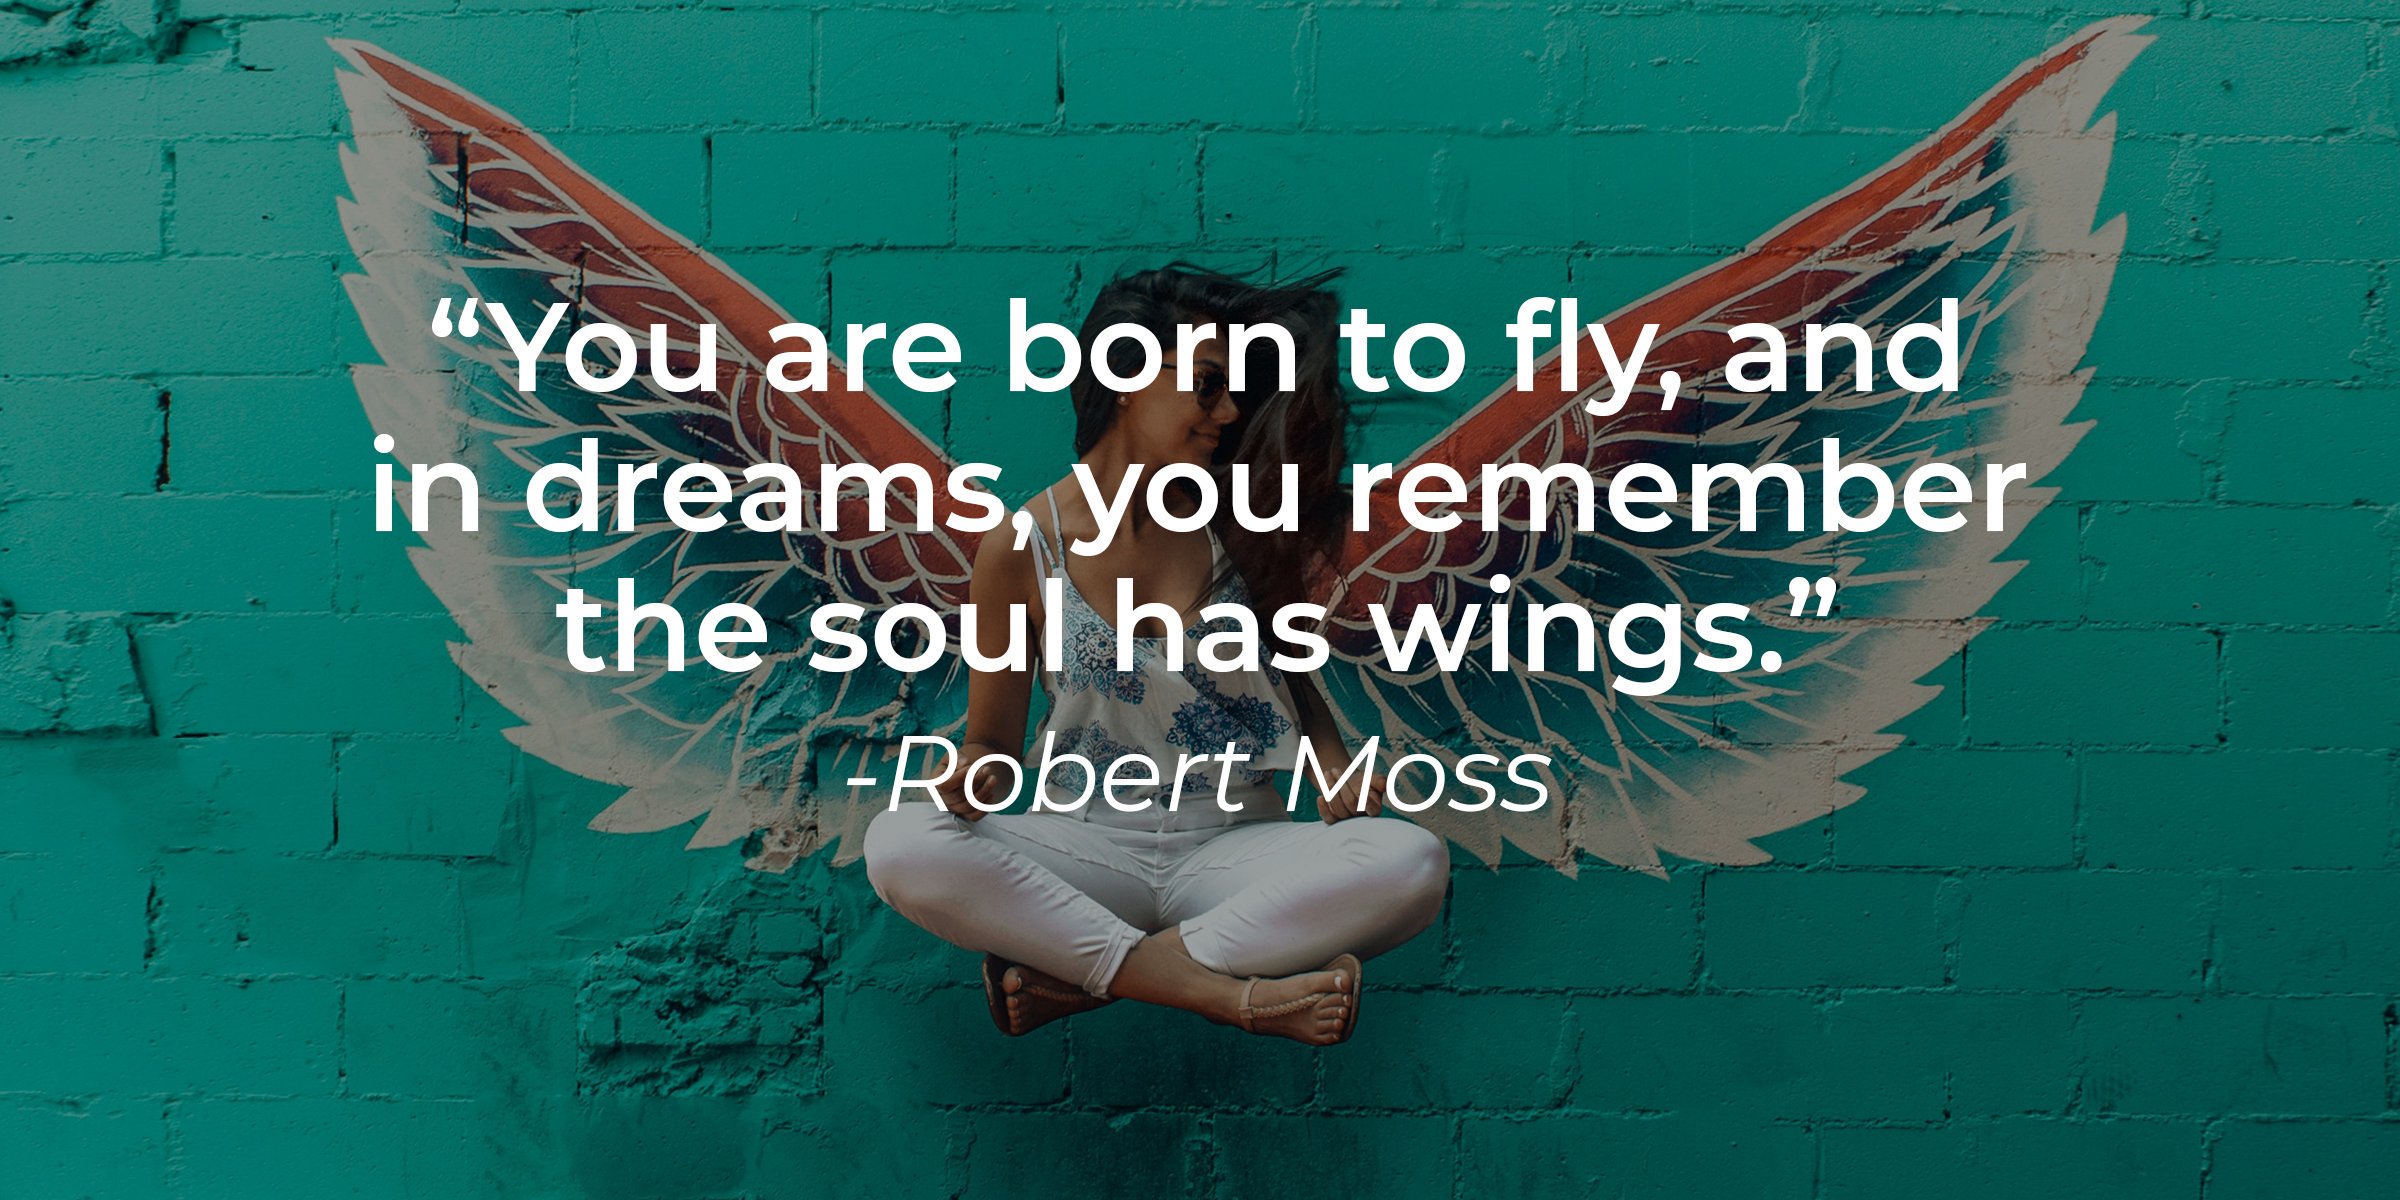 Source: Unsplash | A woman with wings backdrop with the quote: "You are born to fly, and in dreams, you remember the soul has wings."